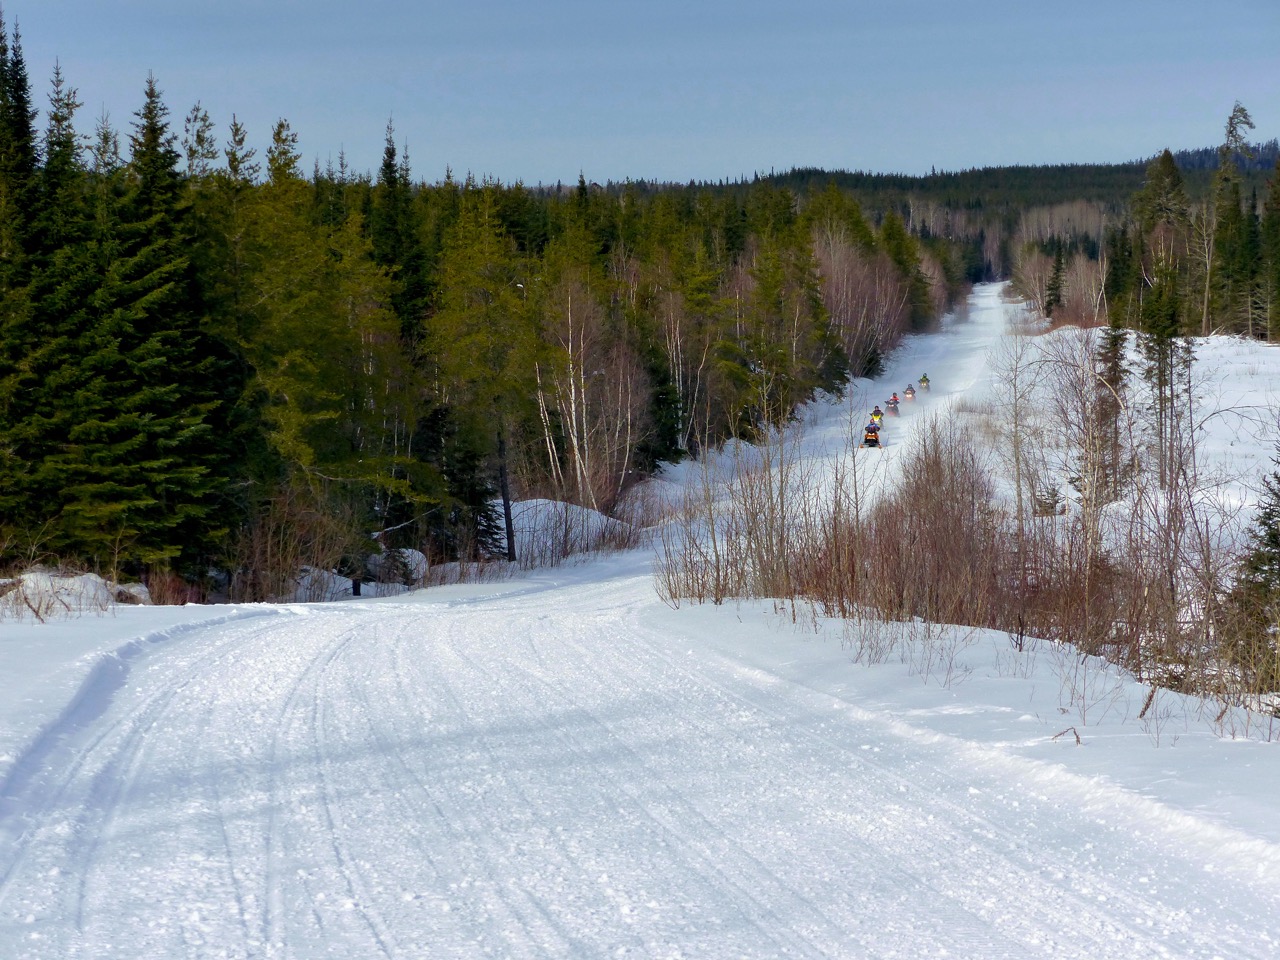 Riding trails like this from a remote snowmobile outpost.